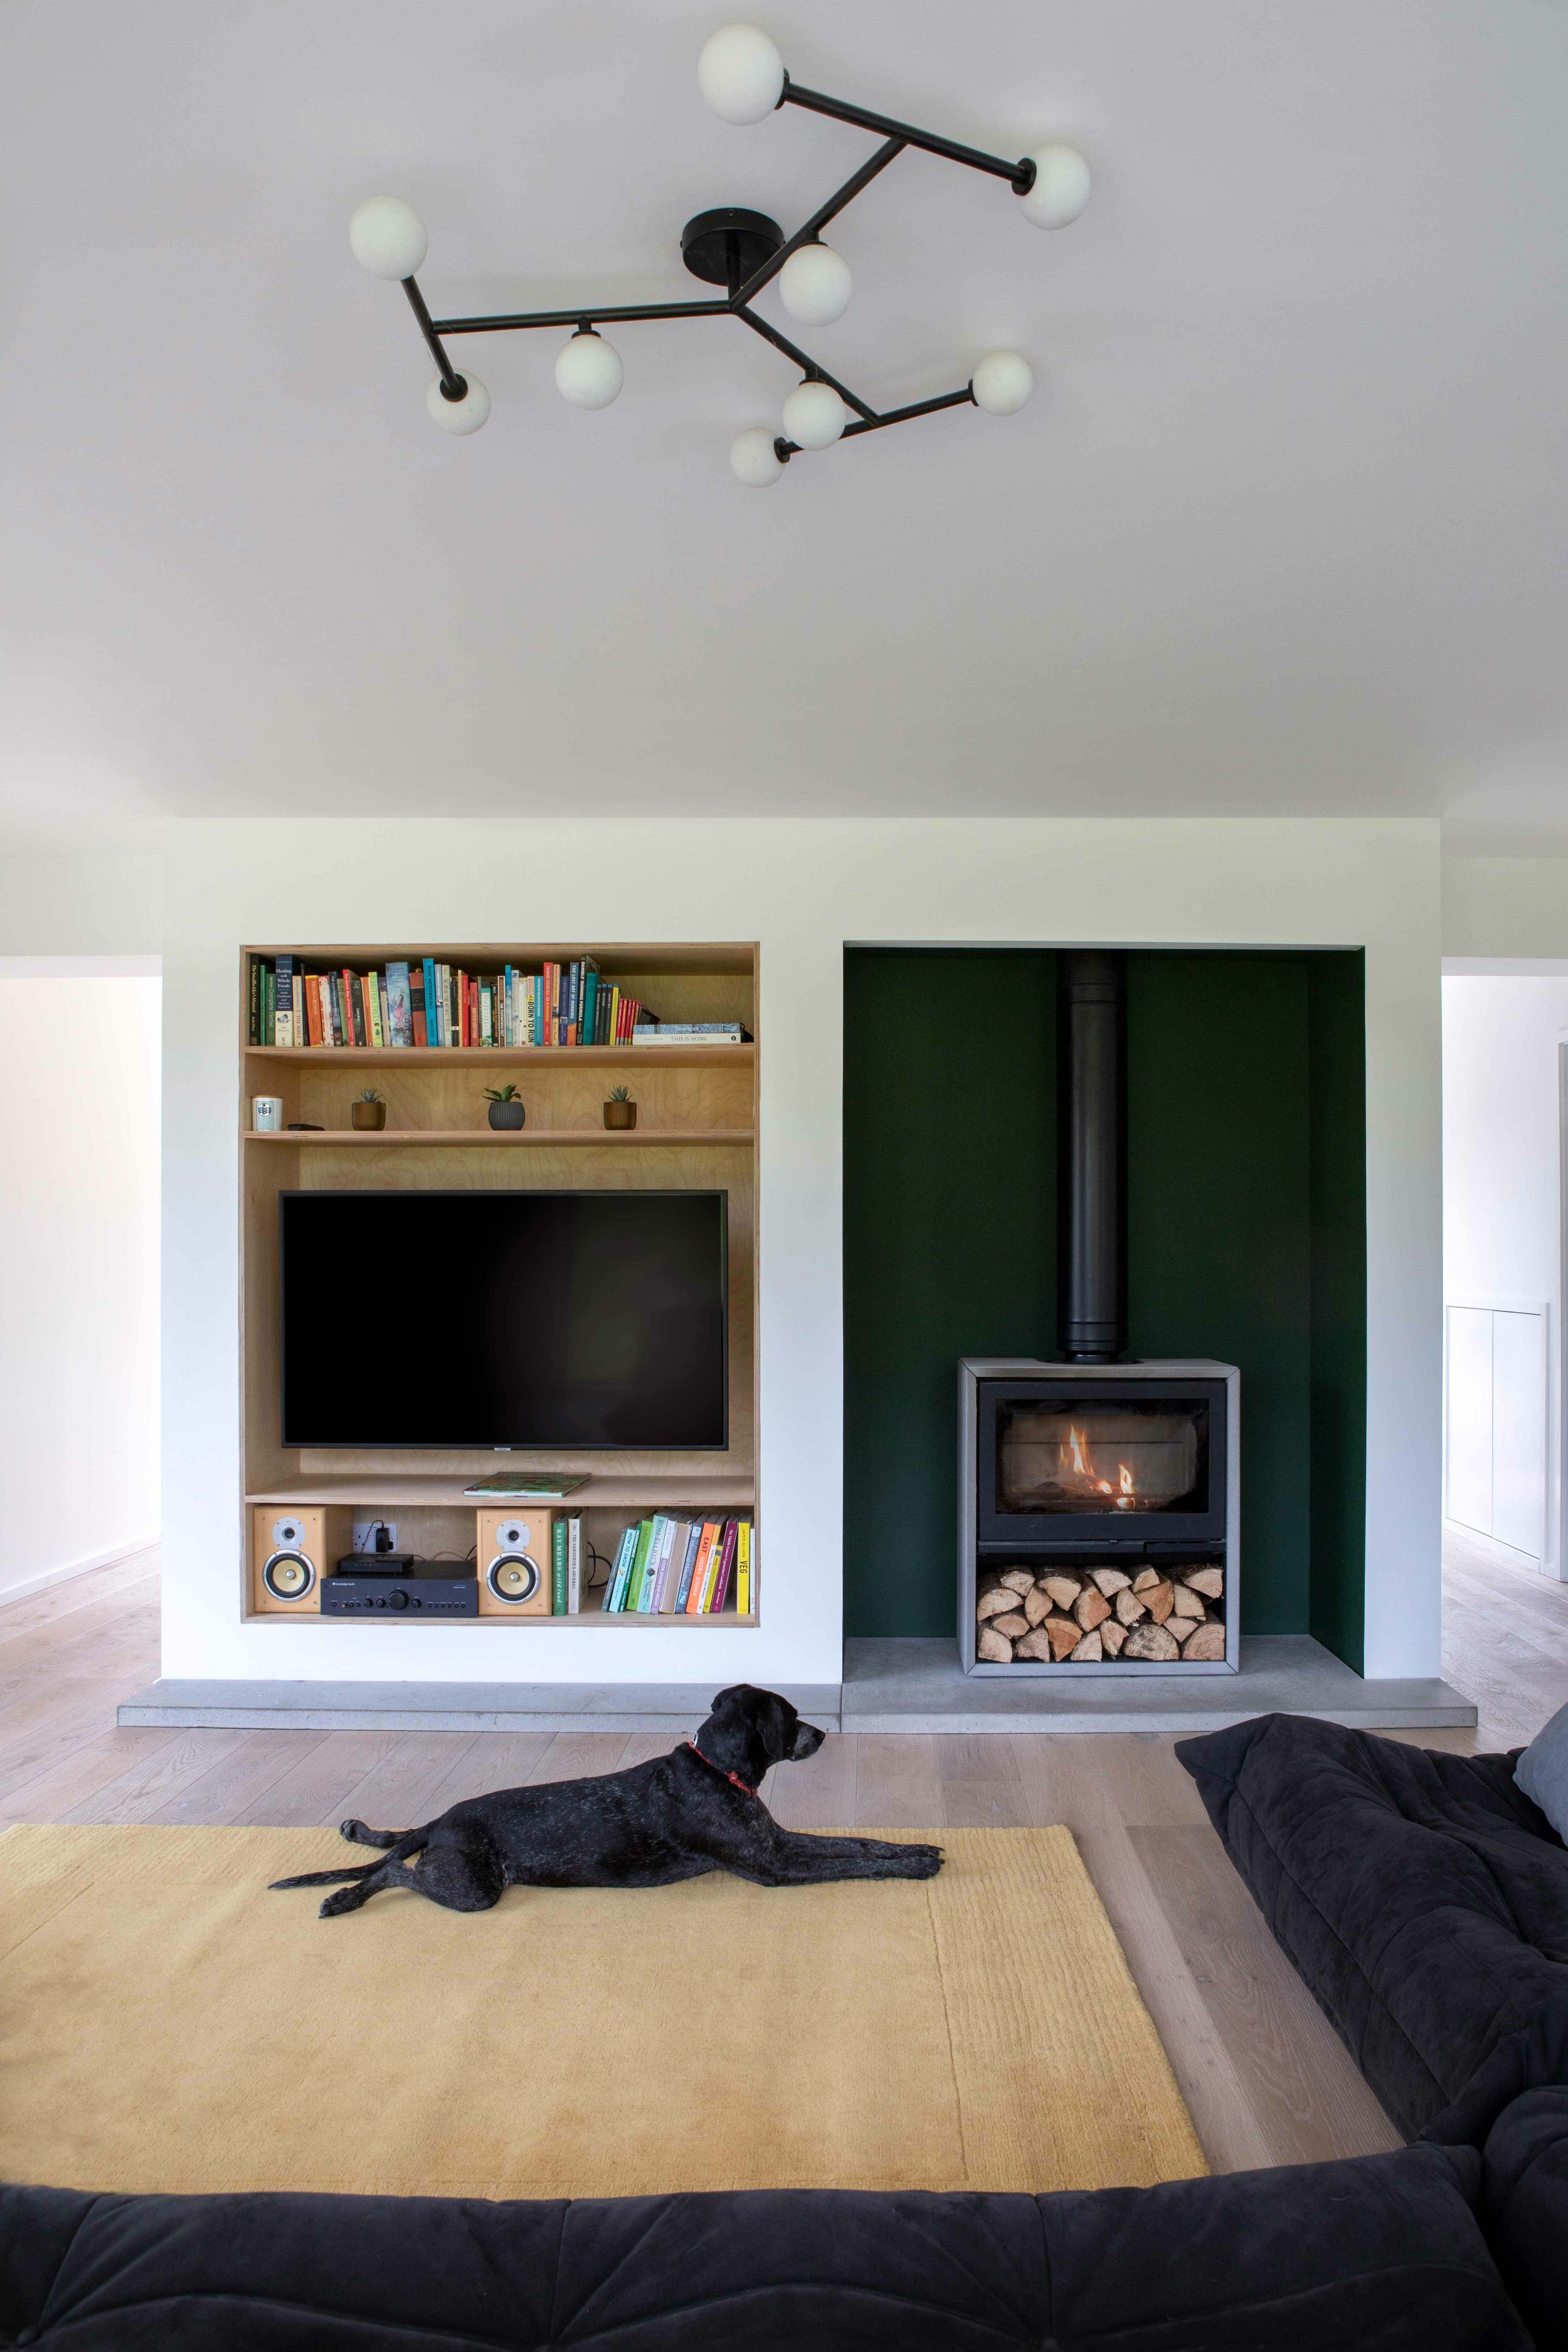 A living room with a black dog lying on a jute rug in front of a lit woodburning stove. The stove is set back within a green feature wall. A birch plywood television cabinet sits next to the woodburning stove containing books and a television.